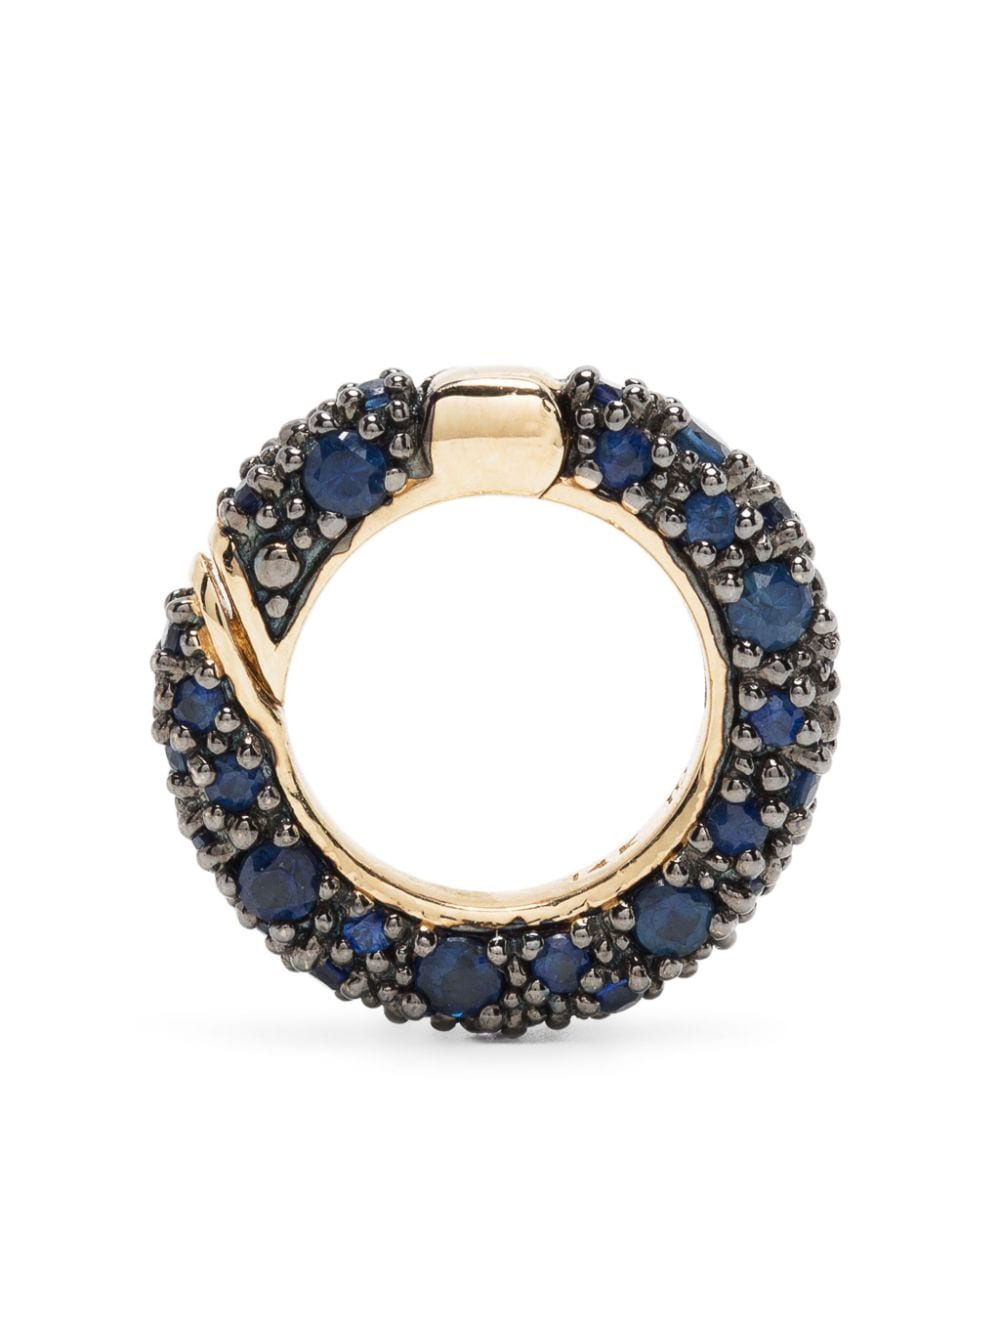 Lucy Delius Jewellery The Blue Sapphire Connector Link